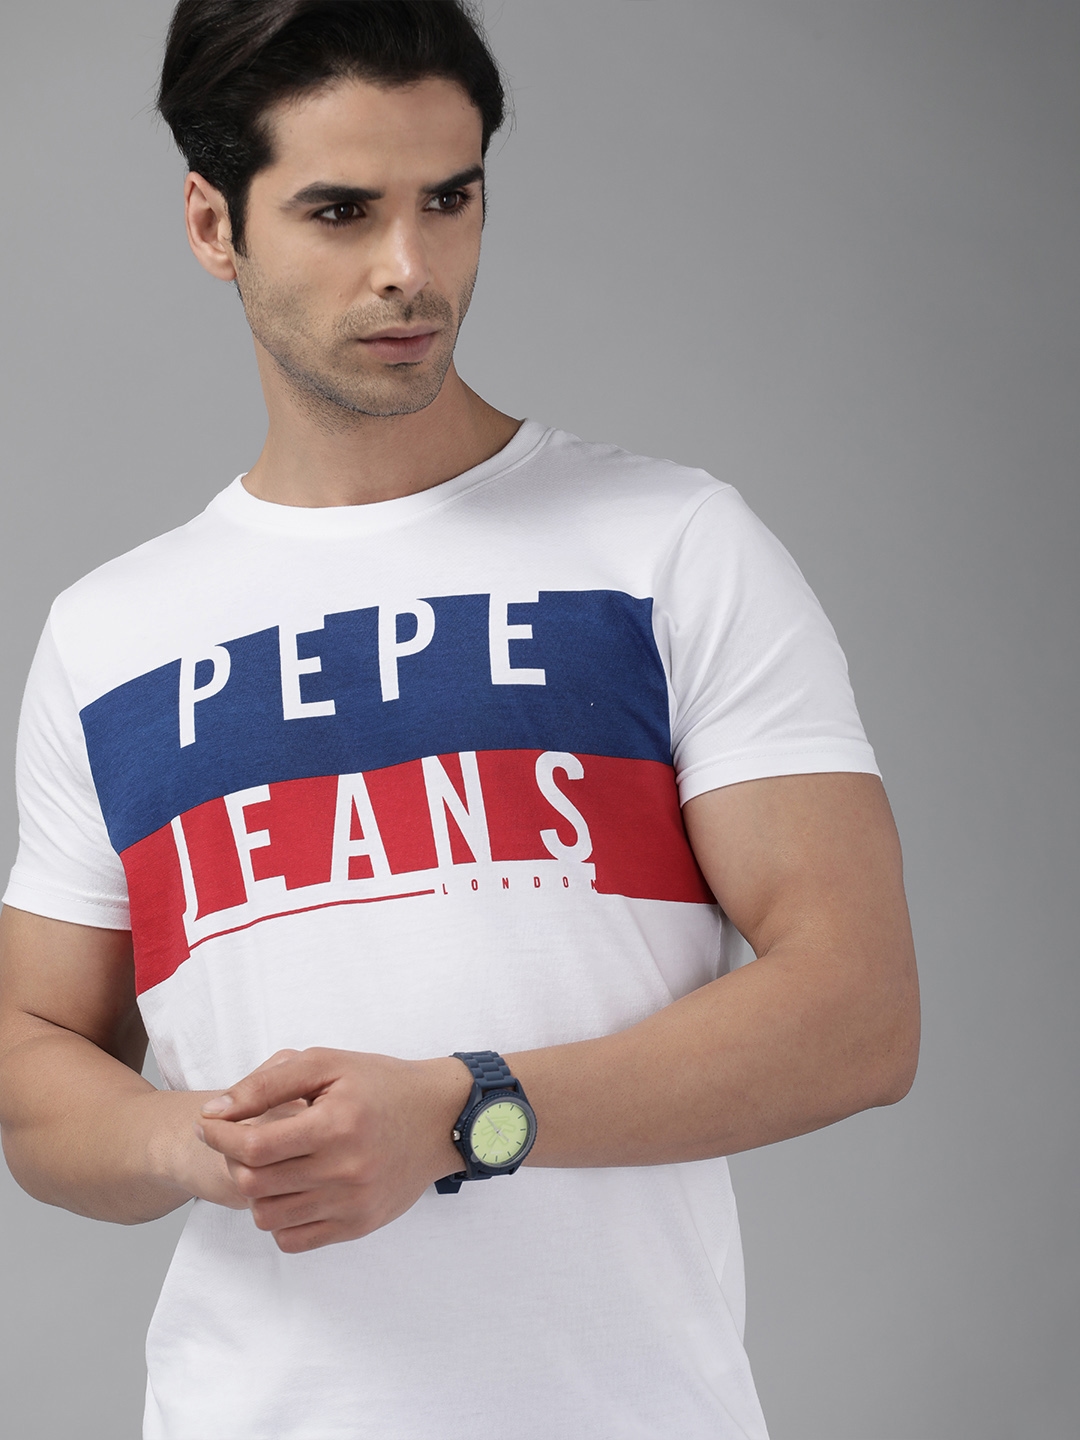 Buy Pepe Jeans Slim Pure 18934850 Shirt | Cotton Fit Printed Men Casual Typography Tshirts Myntra Men for T White 